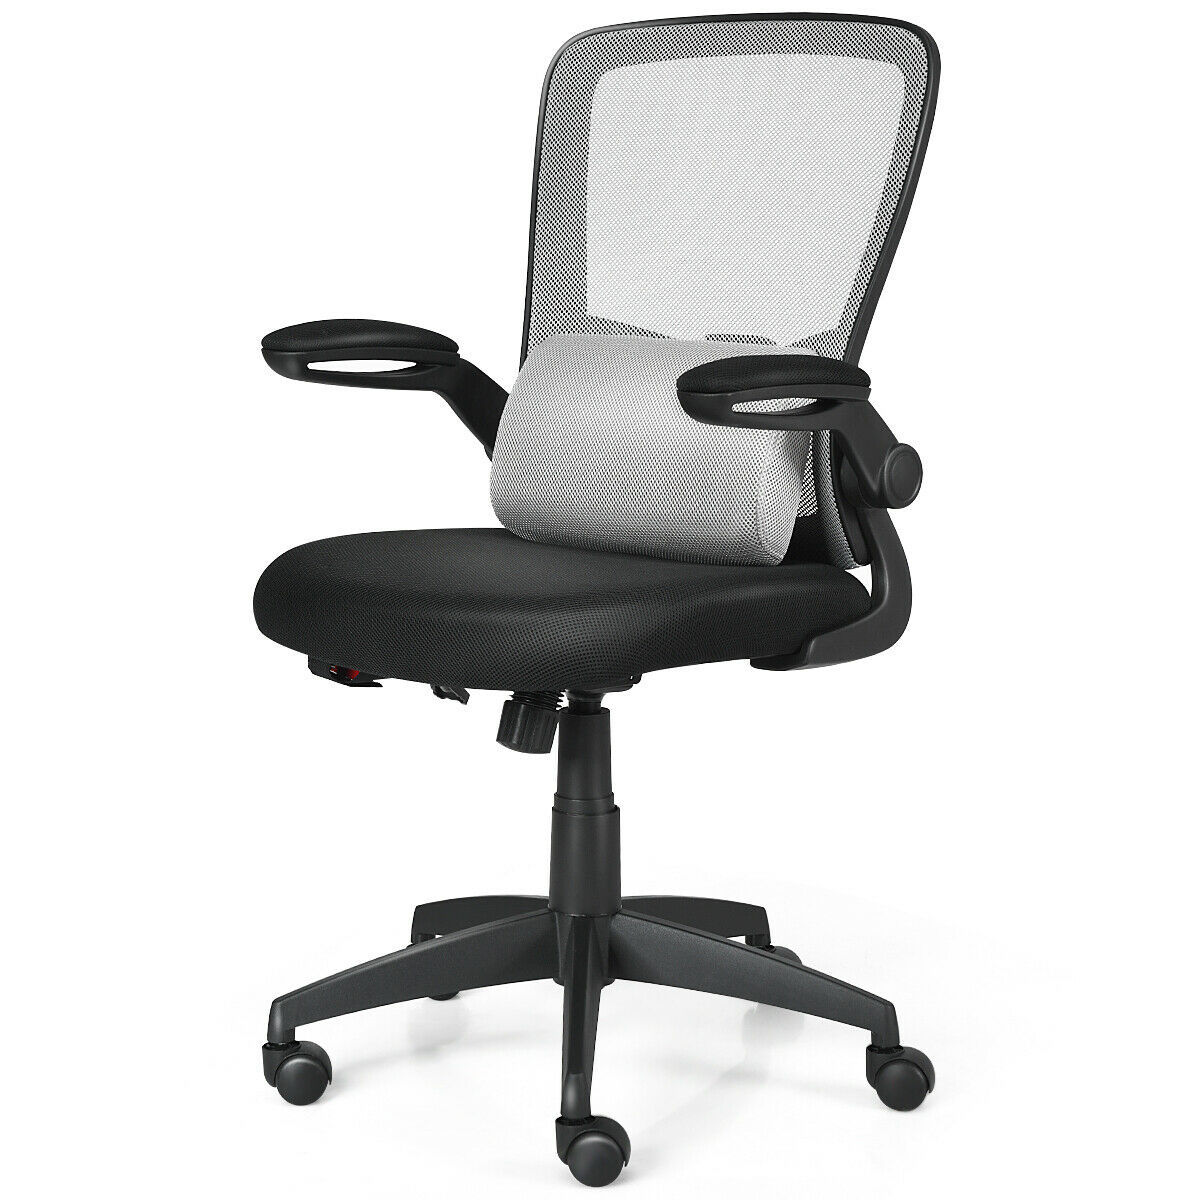 Ergonomic Height Adjustable Office Chair with Massage Pillow